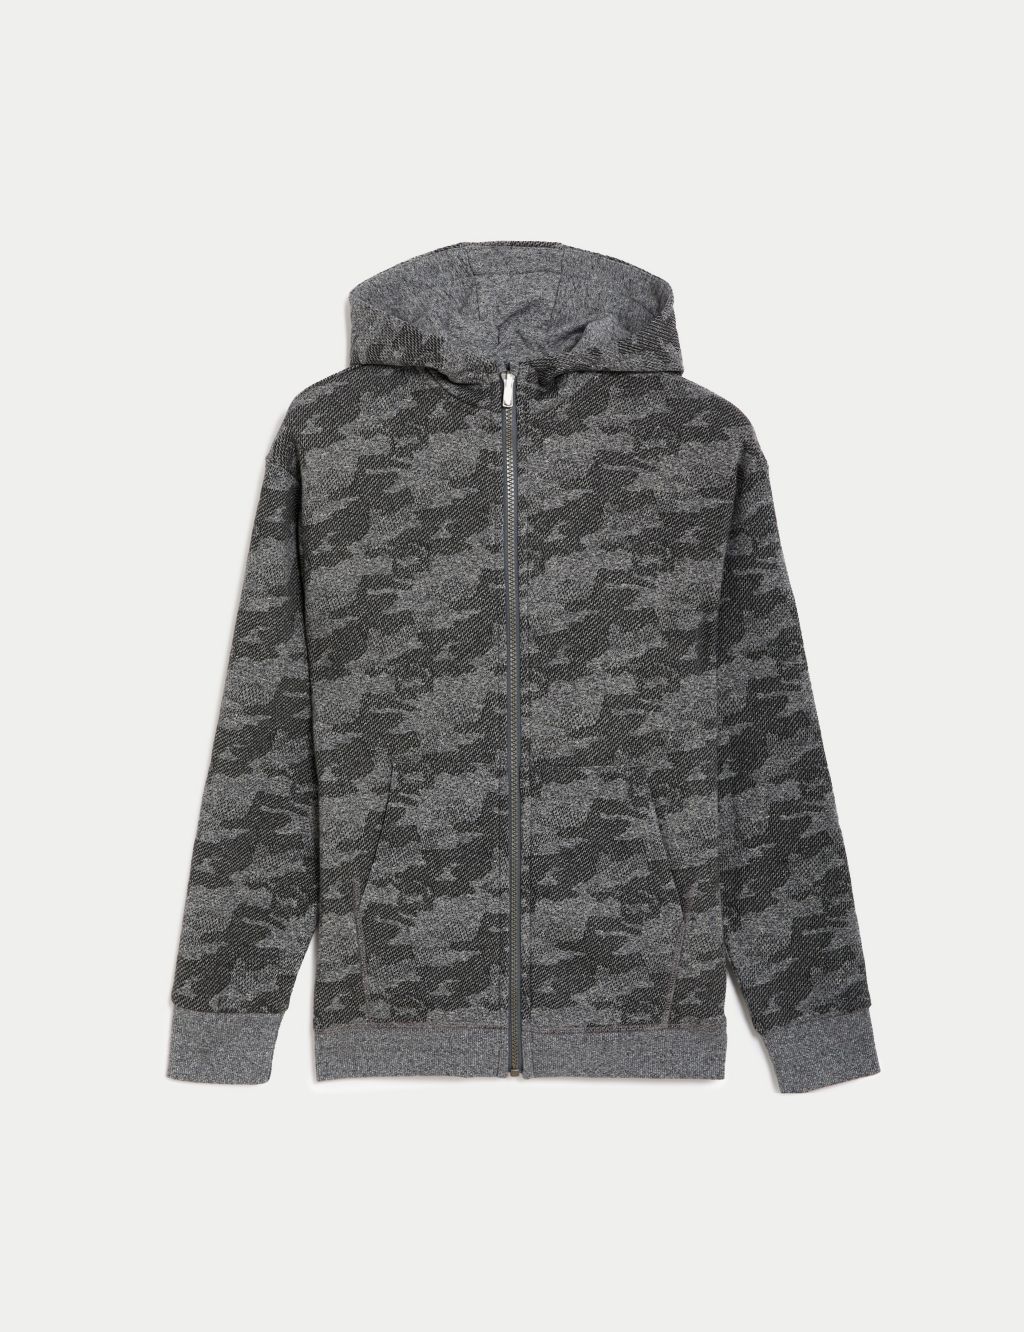 Cotton Rich Patterned Zip Hoodie (6-16 Yrs) image 2